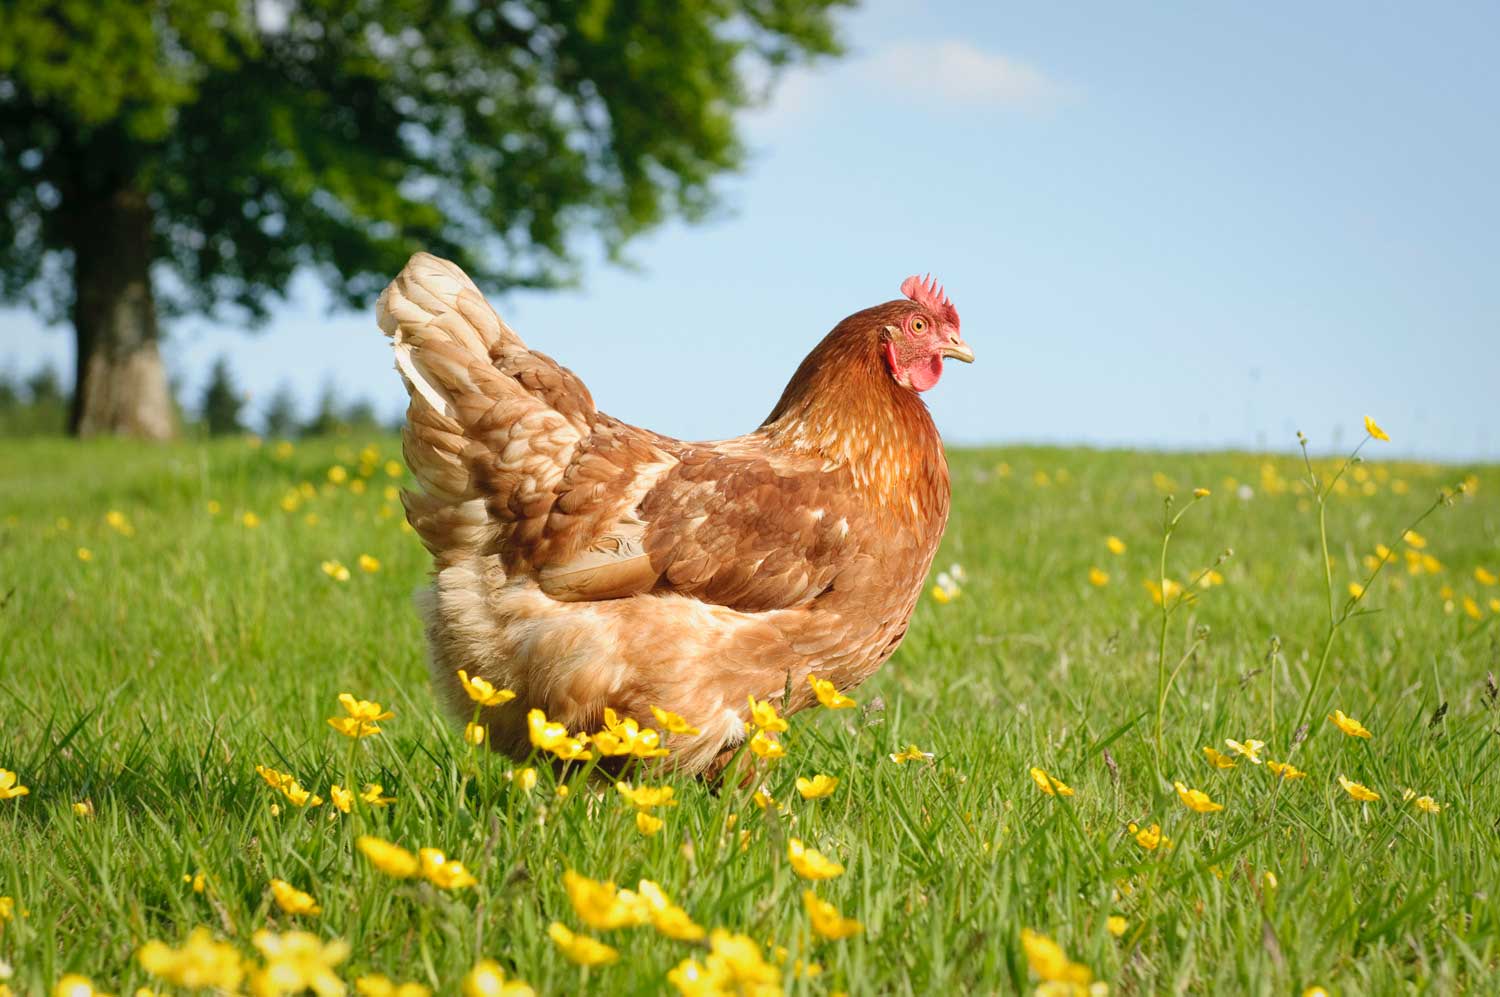 Keeping backyard fowl is becoming more popular, but give your birds plenty of  space.